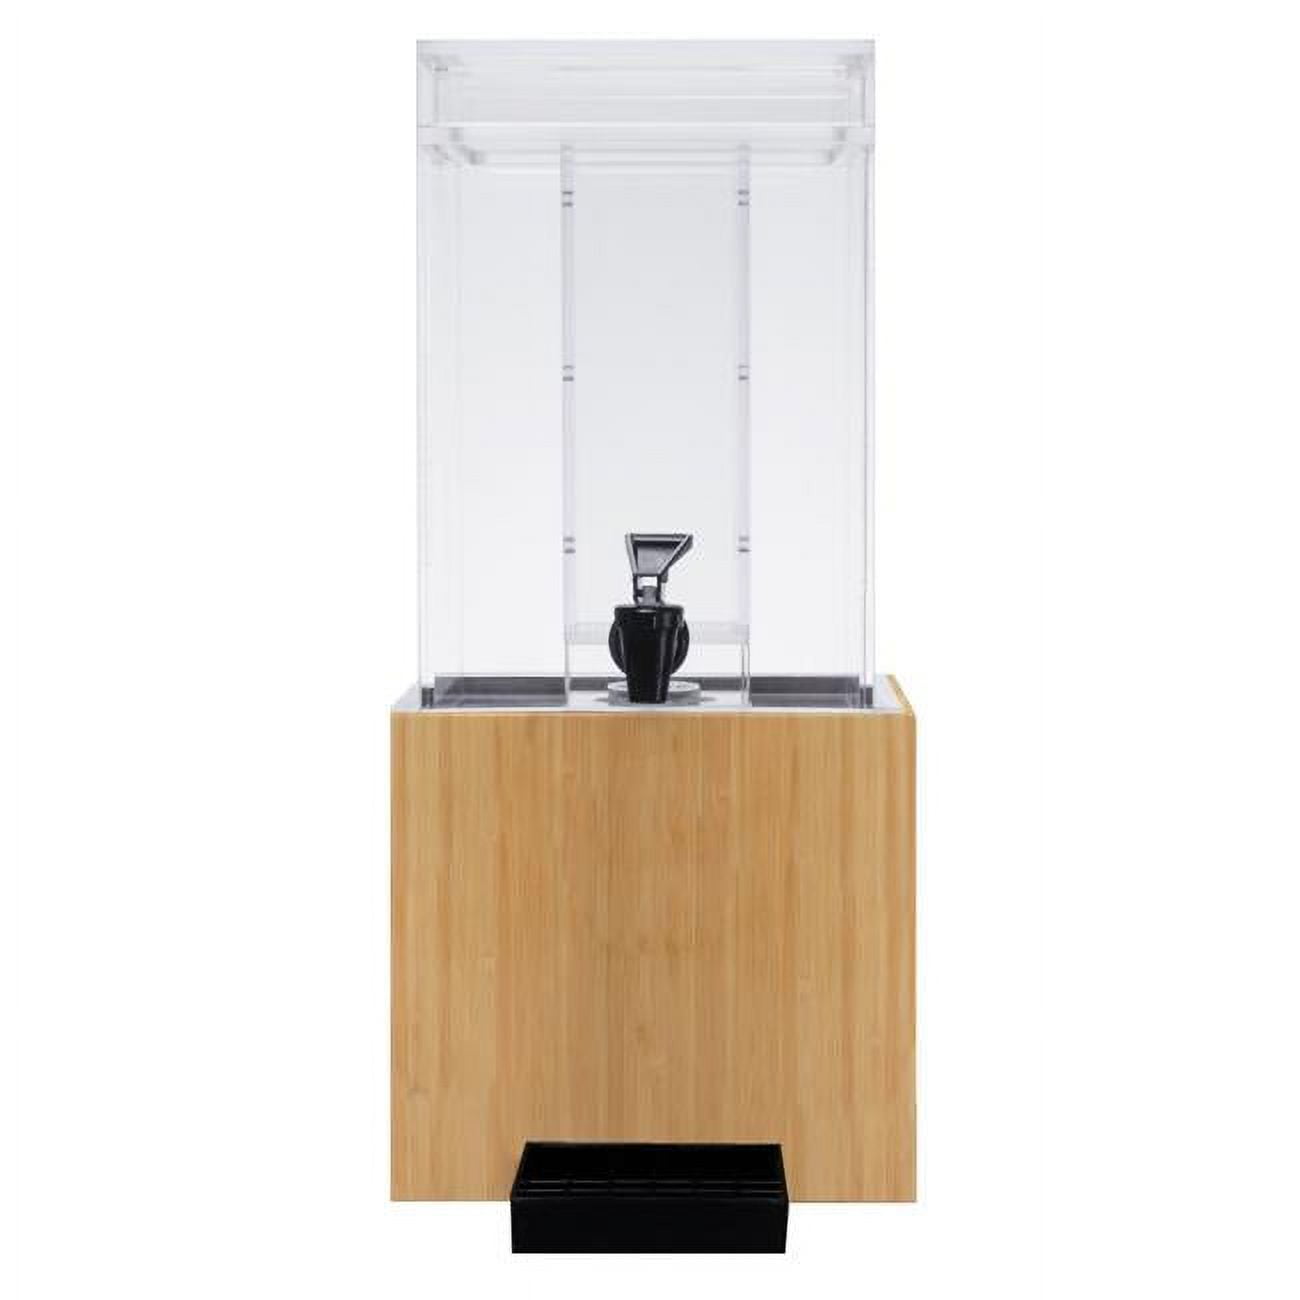 Picture of Cal Mil 1527-1INF-60 1.5 gal Bamboo Infusion Dispenser - 8.125 x 9.75 x 17.75 in.